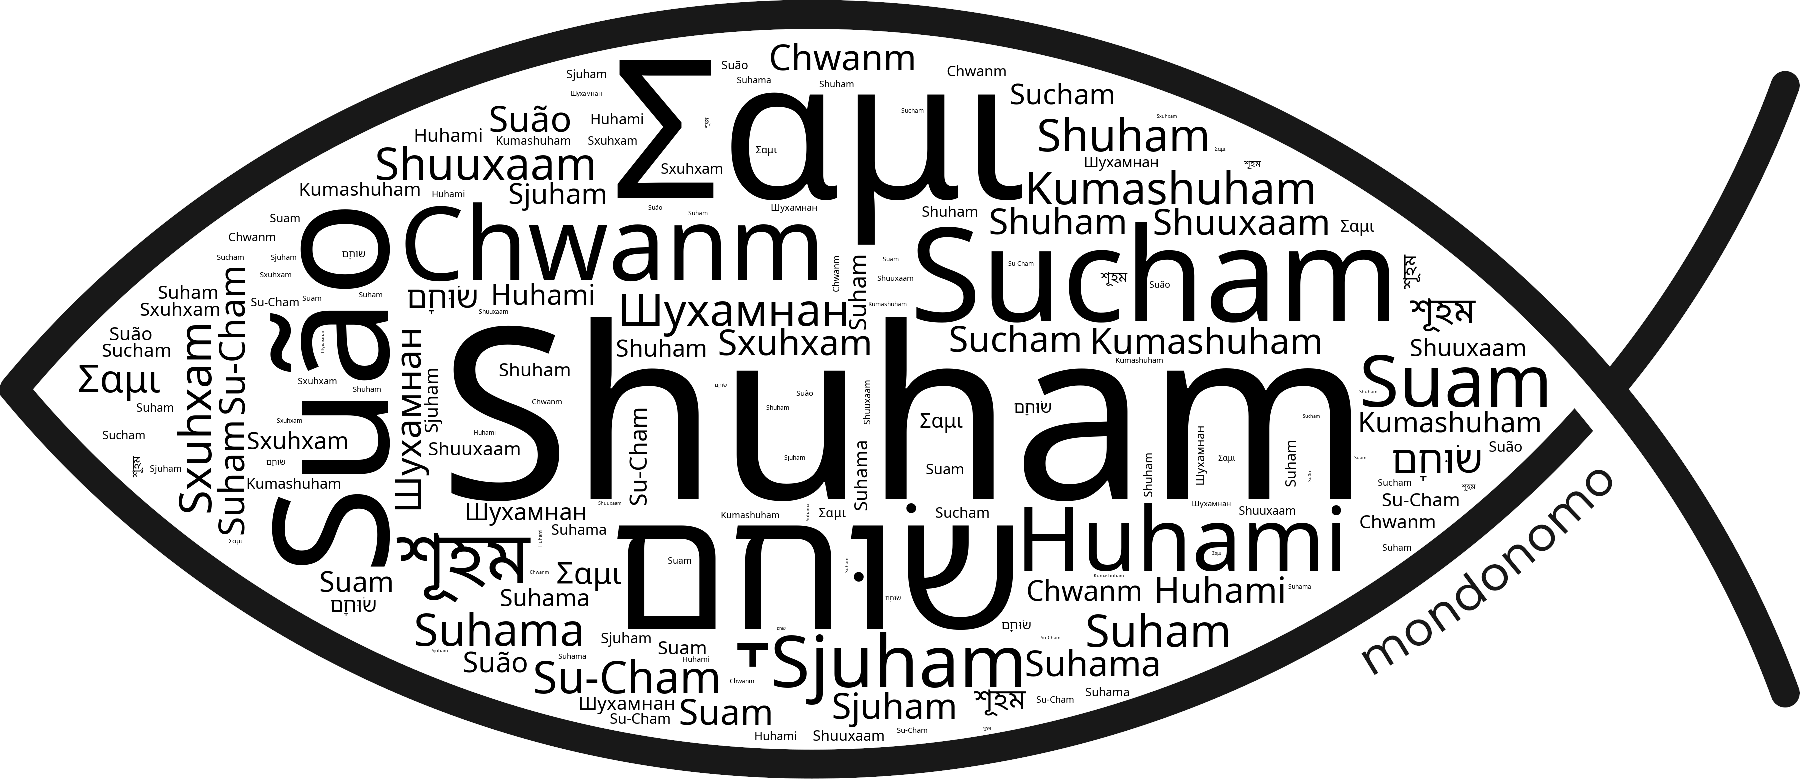 Name Shuham in the world's Bibles